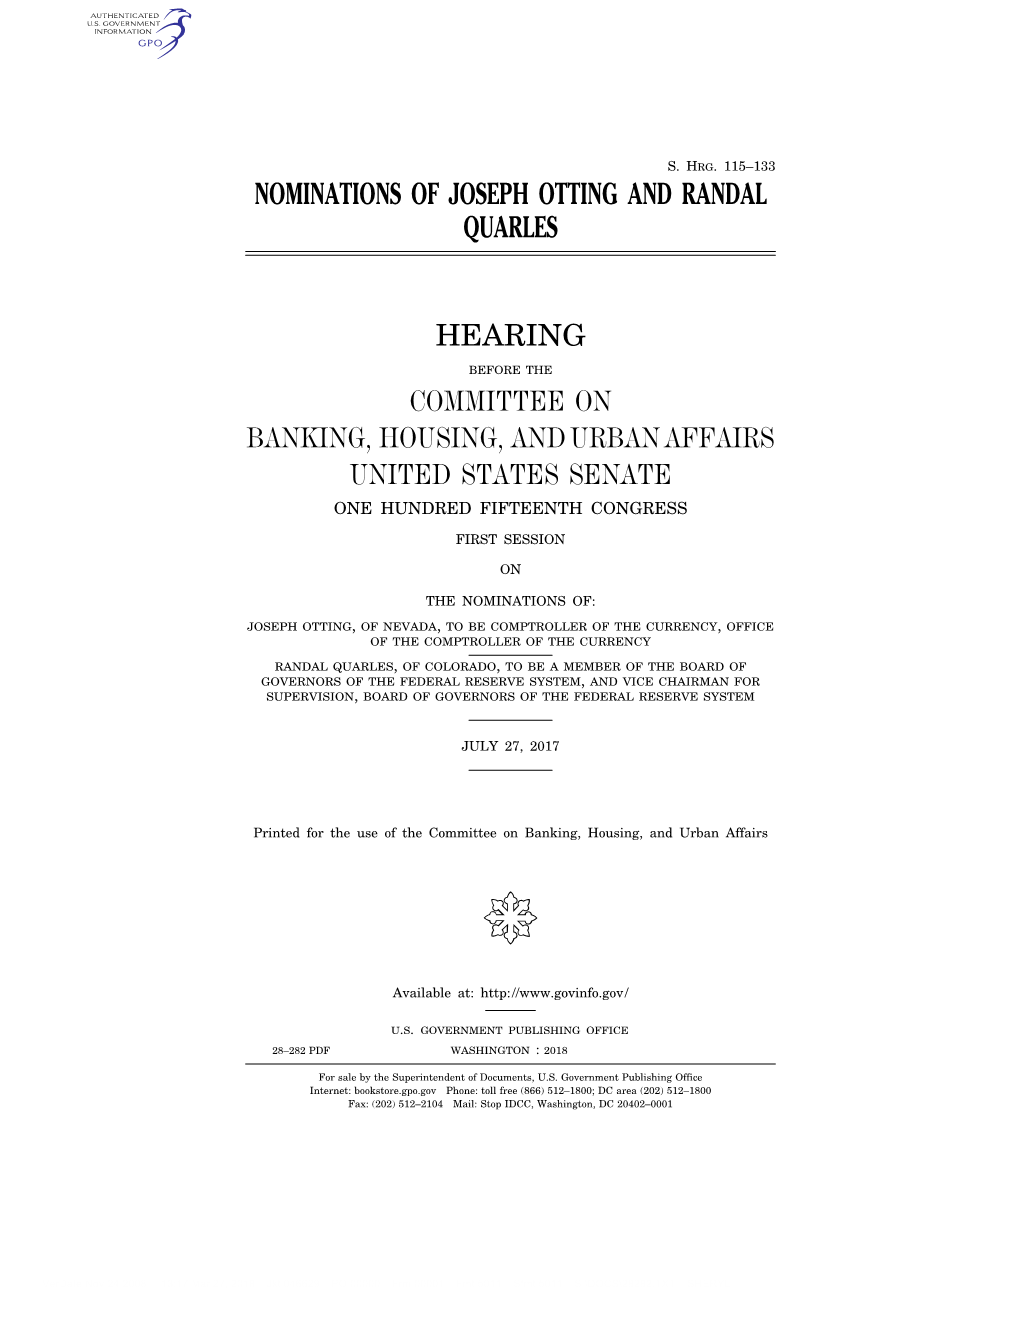 Nominations of Joseph Otting and Randal Quarles Hearing Committee on Banking, Housing, and Urban Affairs United States Senate